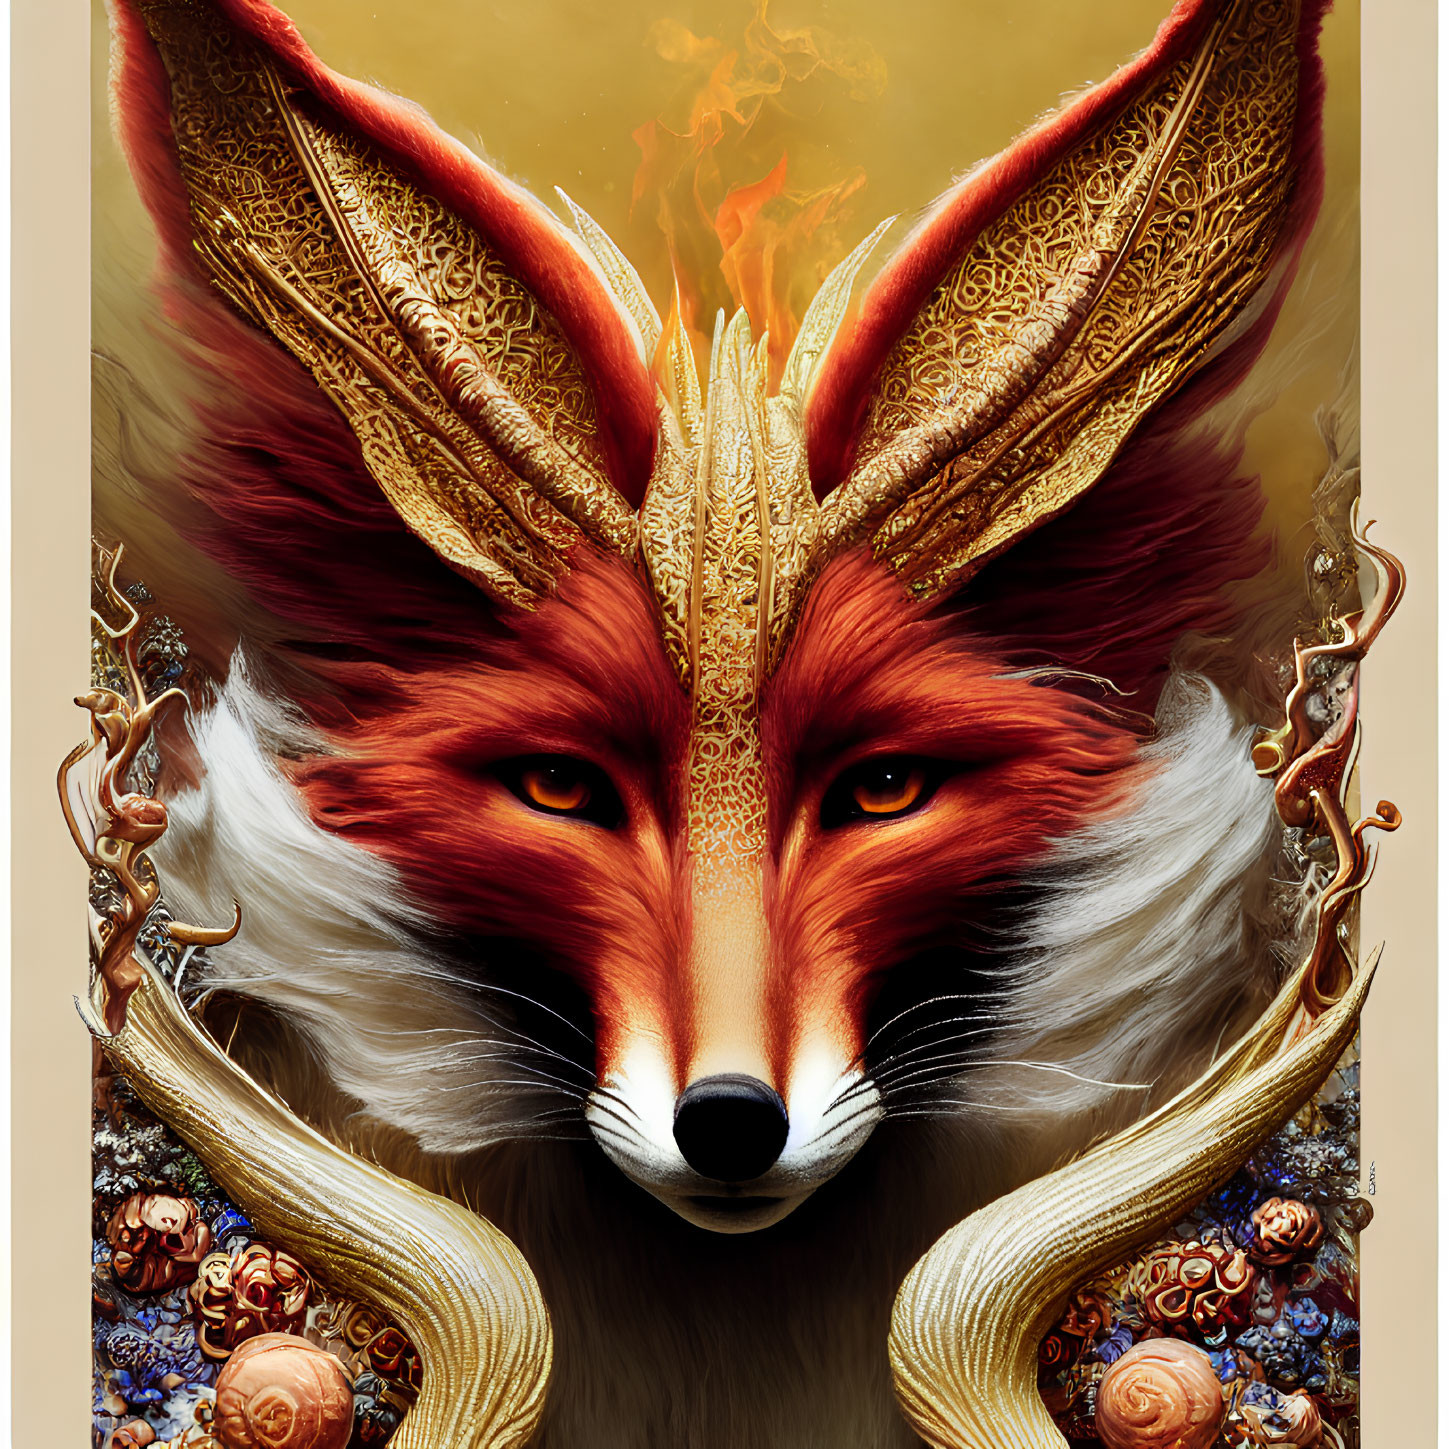 Detailed illustration of majestic fox with fiery crown and golden headpiece on beige background